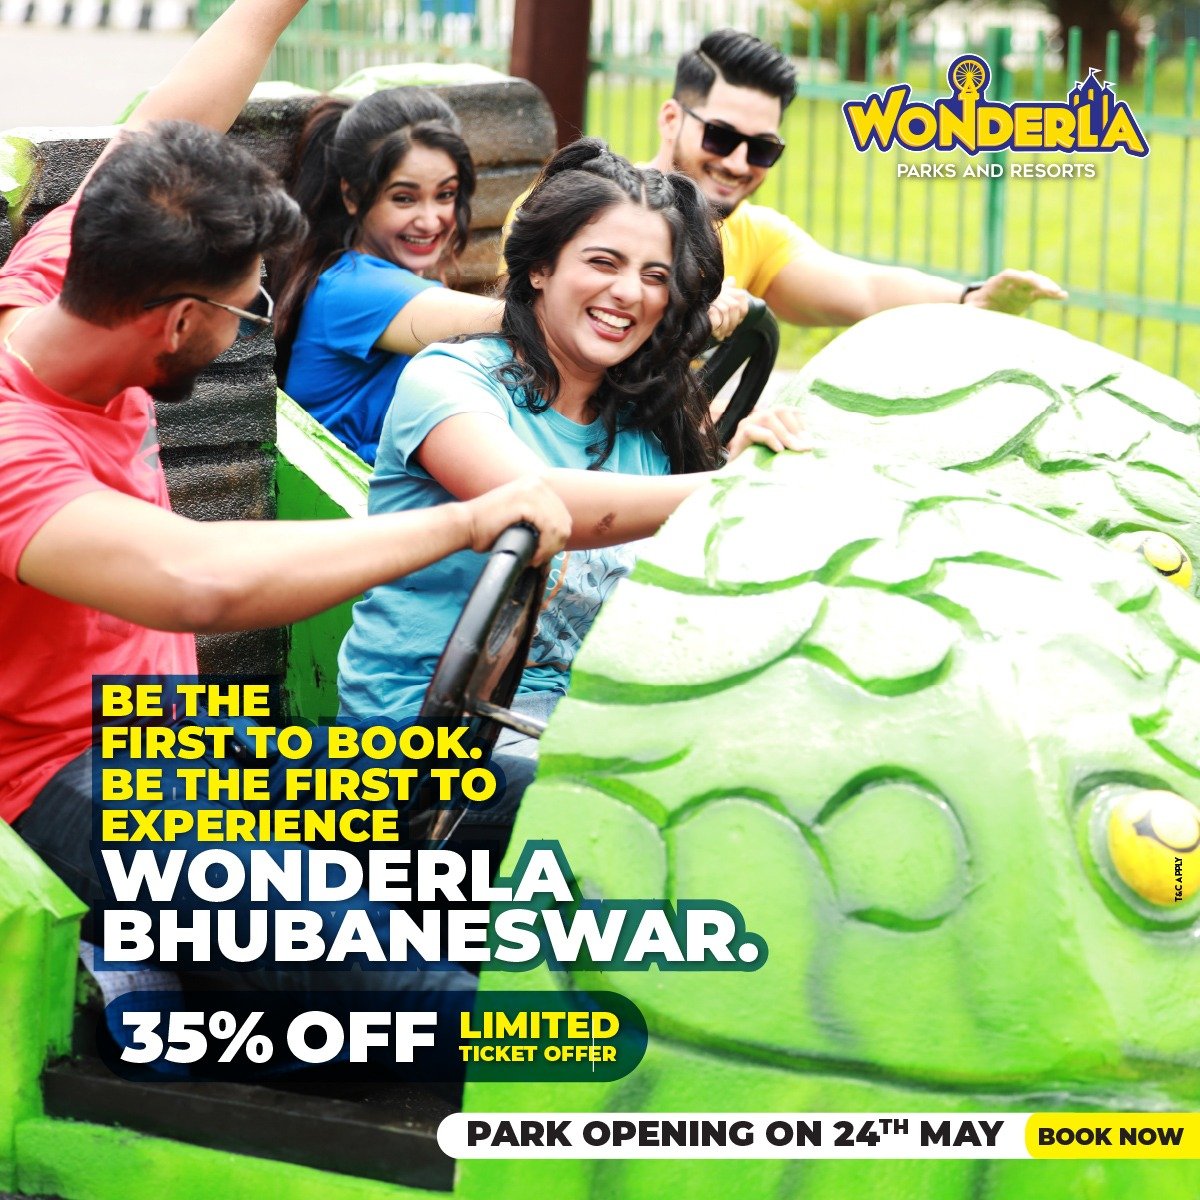 Wonderla Bhubaneswar Announces Special Soft Launch Offer: Tickets starting at just Rs.649*